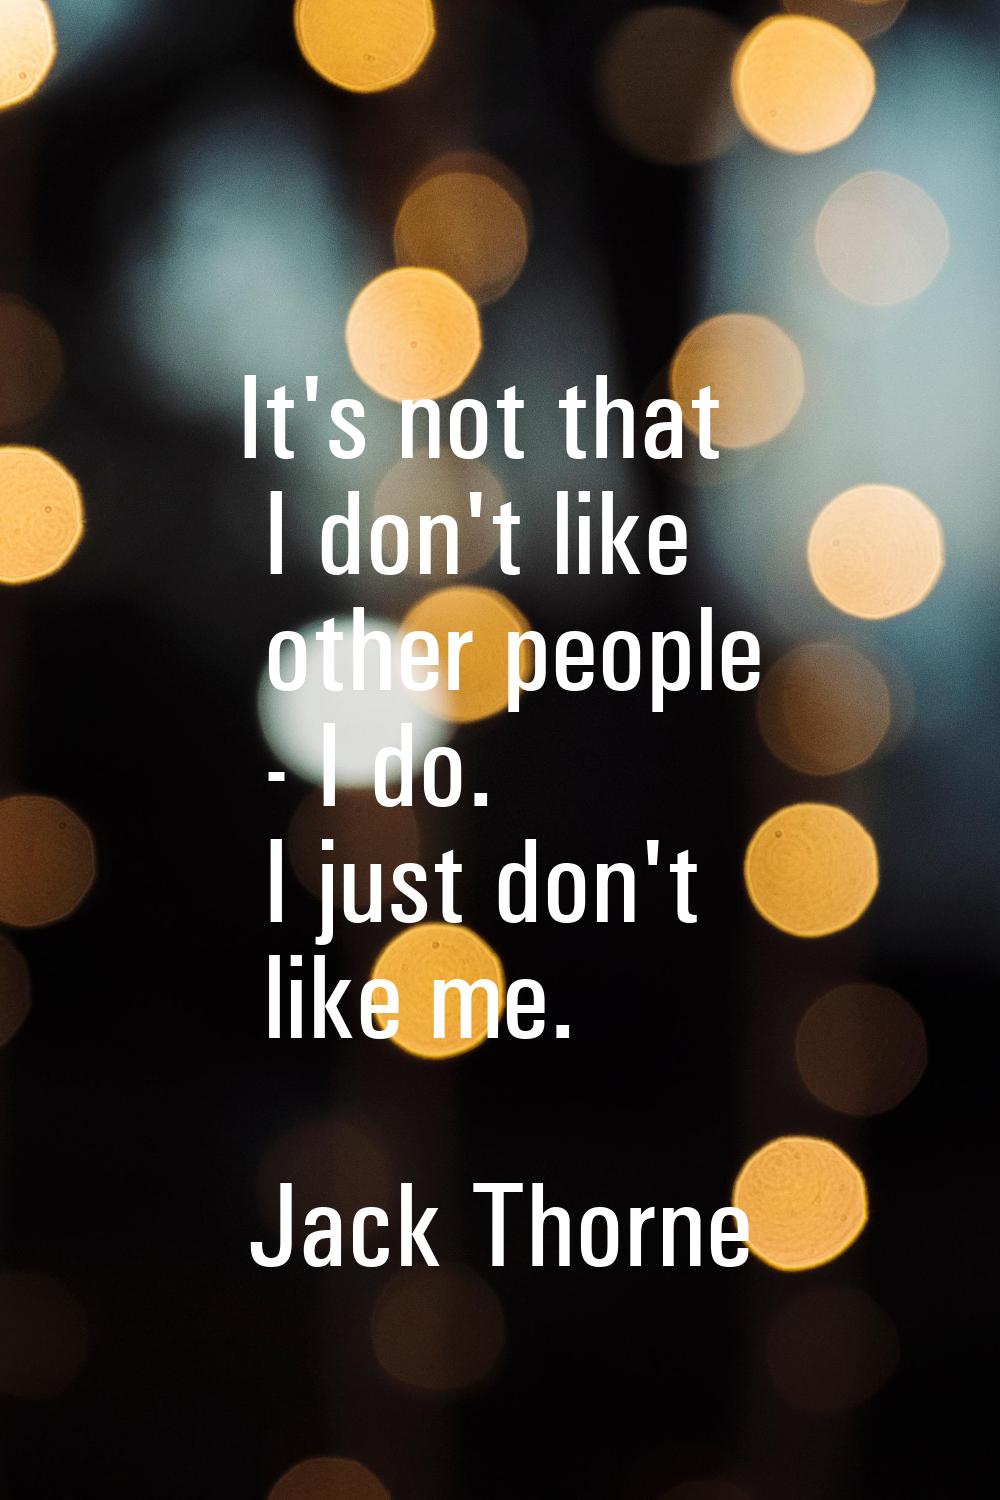 It's not that I don't like other people - I do. I just don't like me.